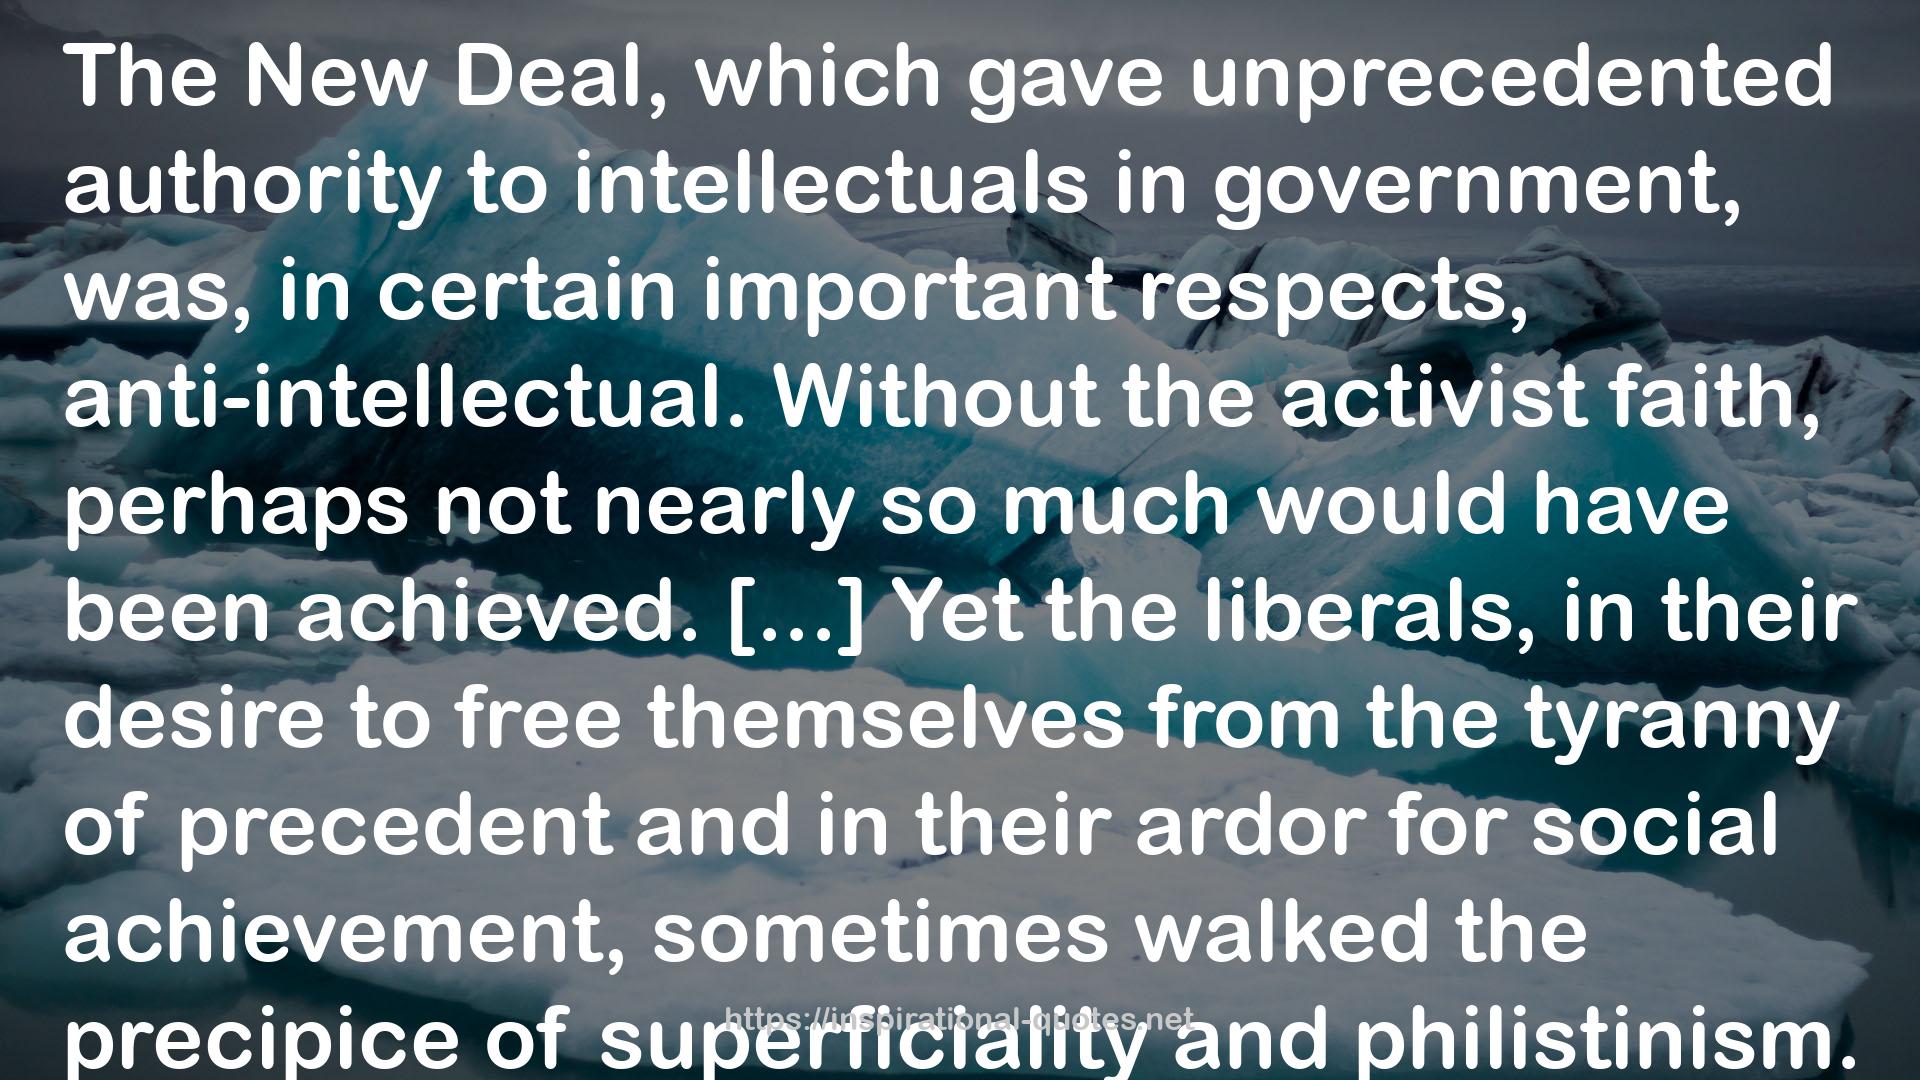 Franklin D. Roosevelt and the New Deal, 1932-1940 QUOTES